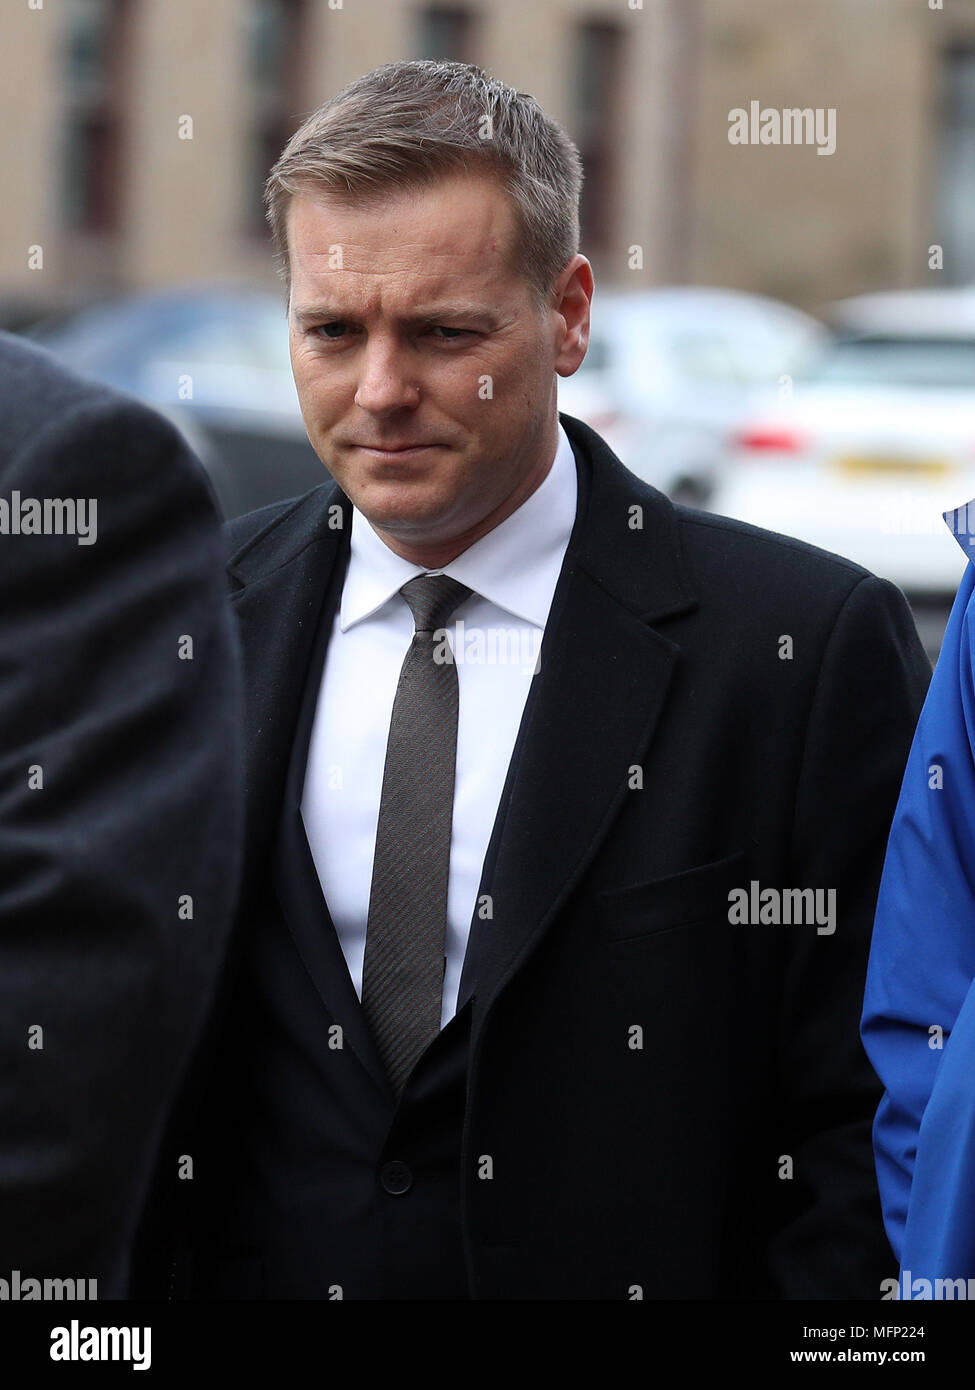 Canadian pilot Jean-Francois Perreault at Paisley Sheriff Court, who along with Imran Zafar Syed had been accused of being over the legal alcohol limit as they prepared to fly an Air Transat passenger jet from Glasgow to Toronto. Both men have been cleared after key evidence was destroyed by prison staff. 23/03/2017 Stock Photo